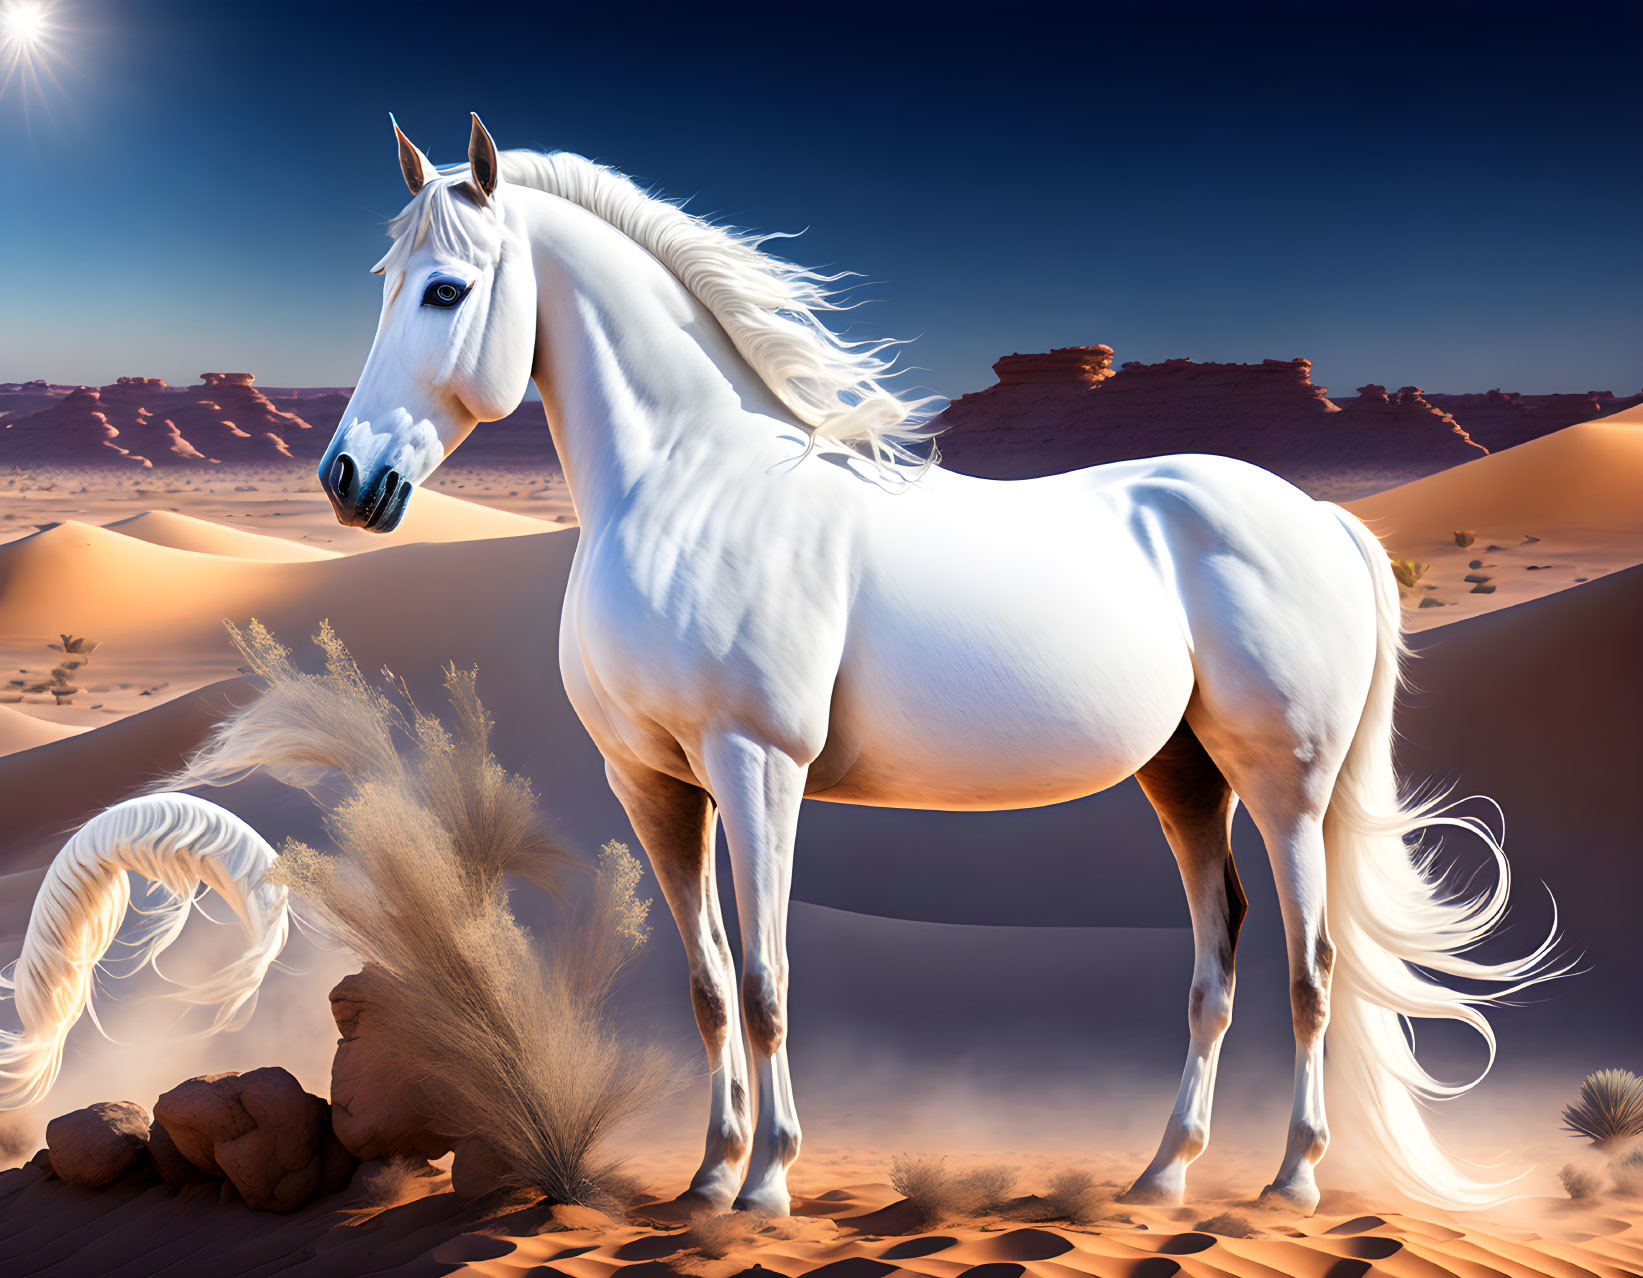 White Horse in Desert Landscape with Dunes and Blue Sky